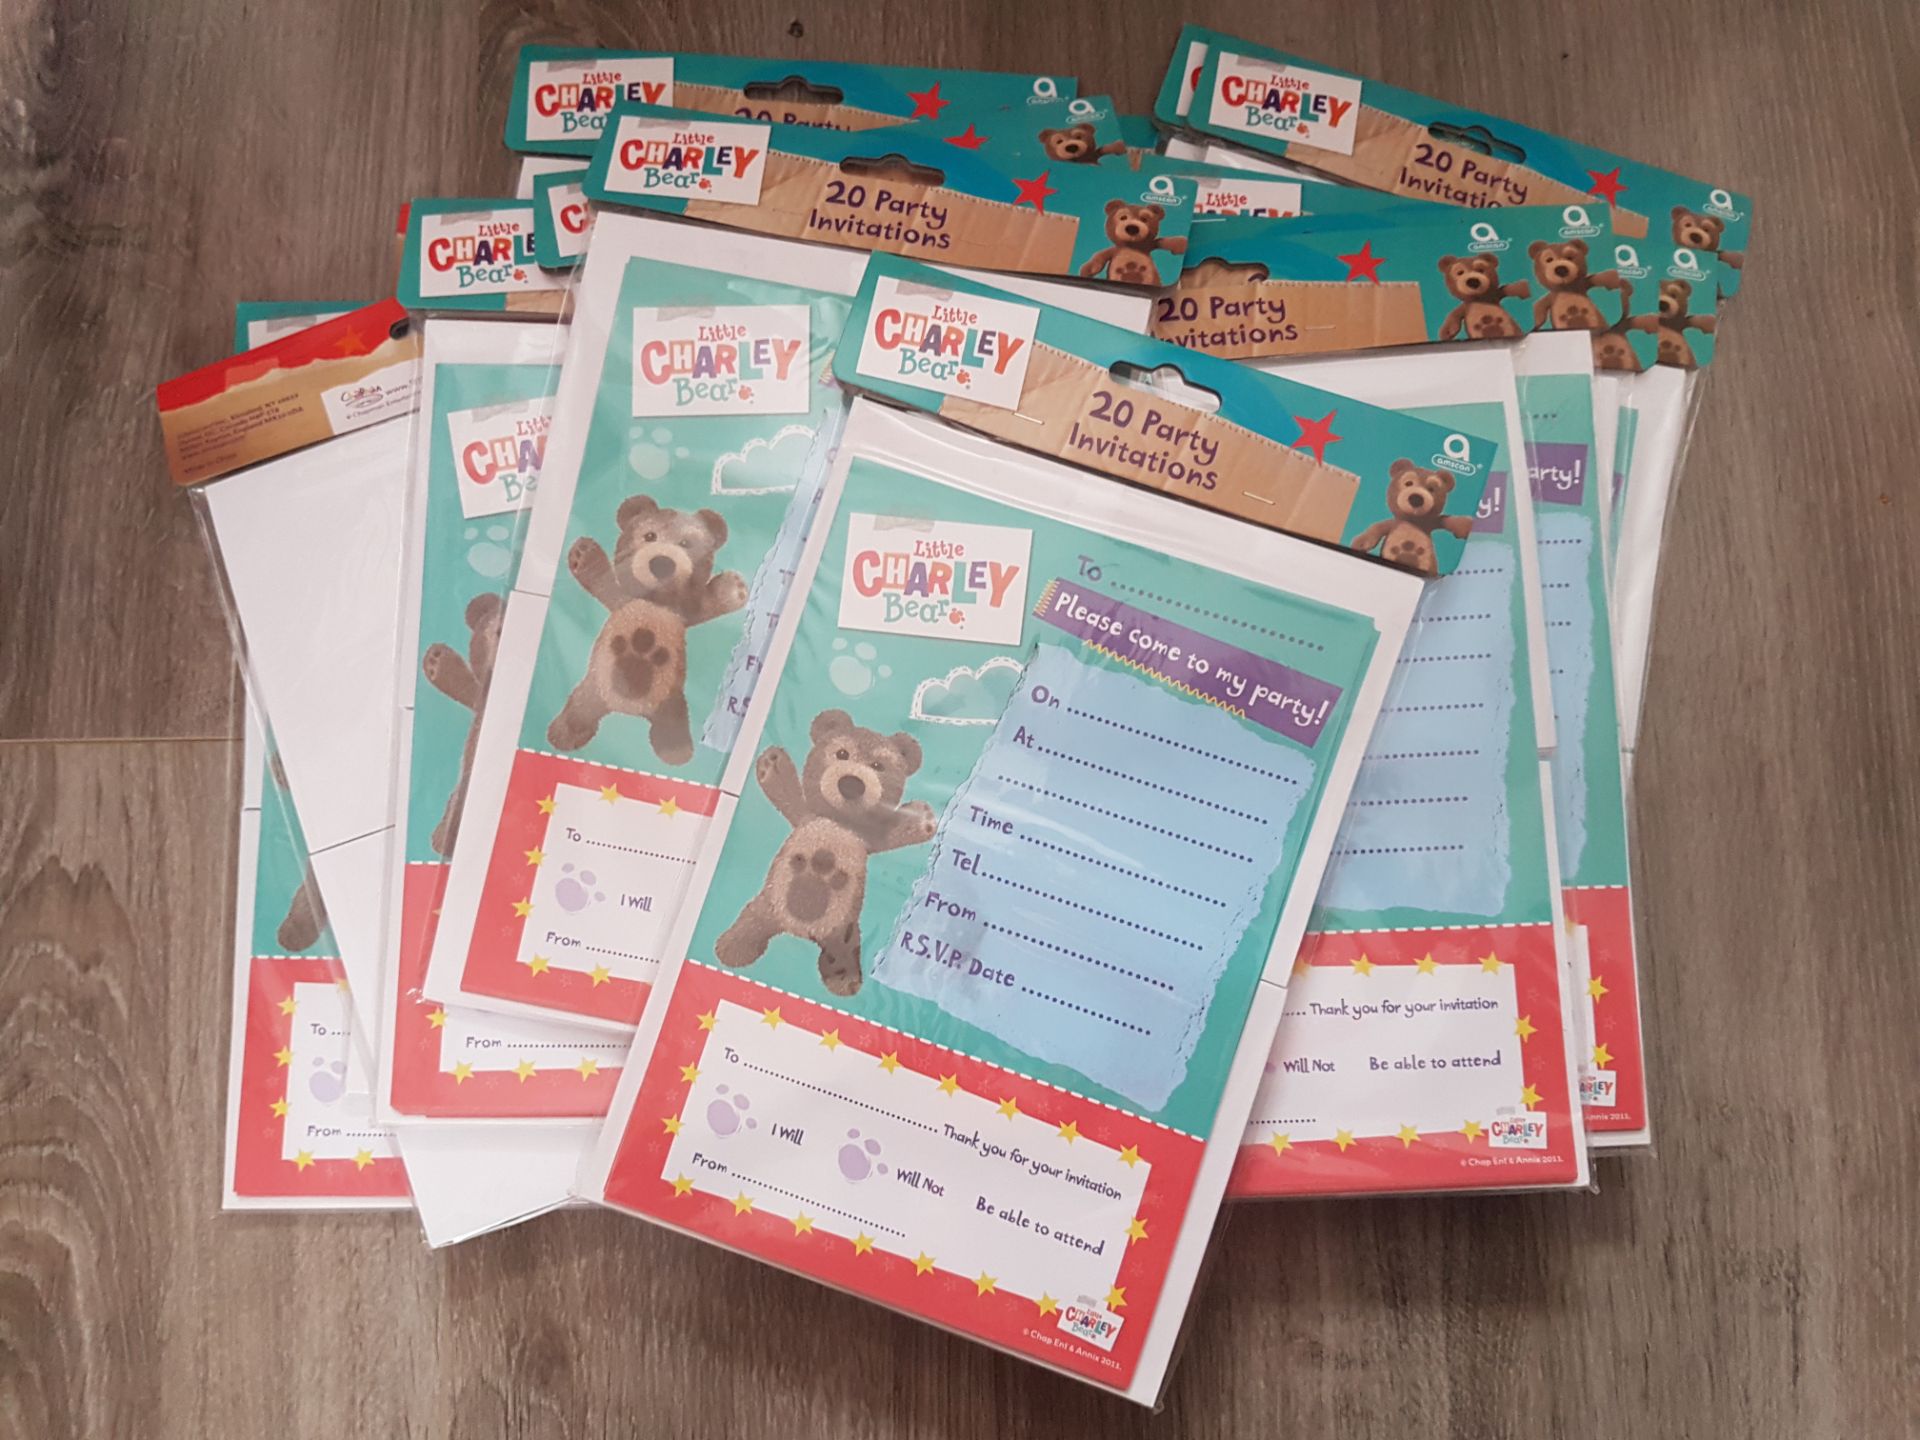 300 Little Charley Bear party invites with envelopes. Brand new packaged.